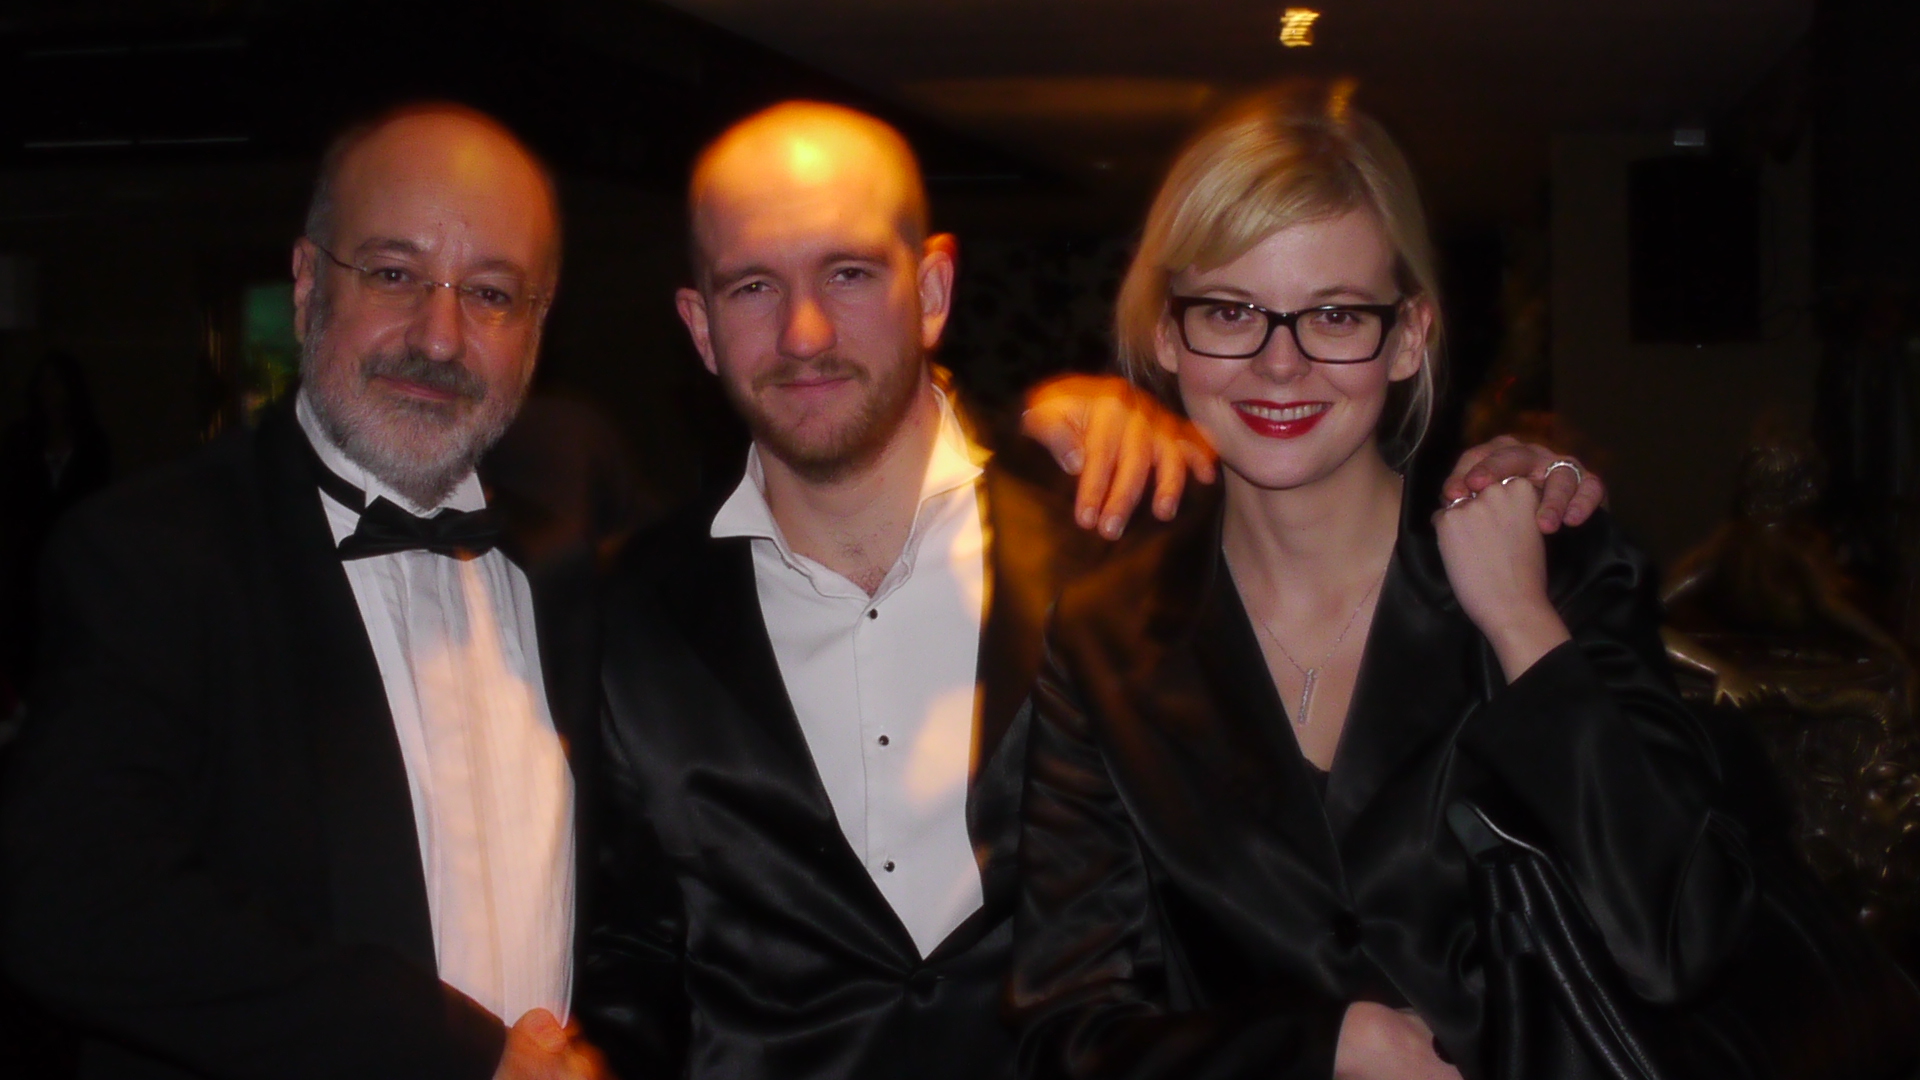 George Chiesa, David Reynolds and Joanna Ignaczewska, at The UnderWater Realm (World premiere, Dec 20th, 2012) - After Party